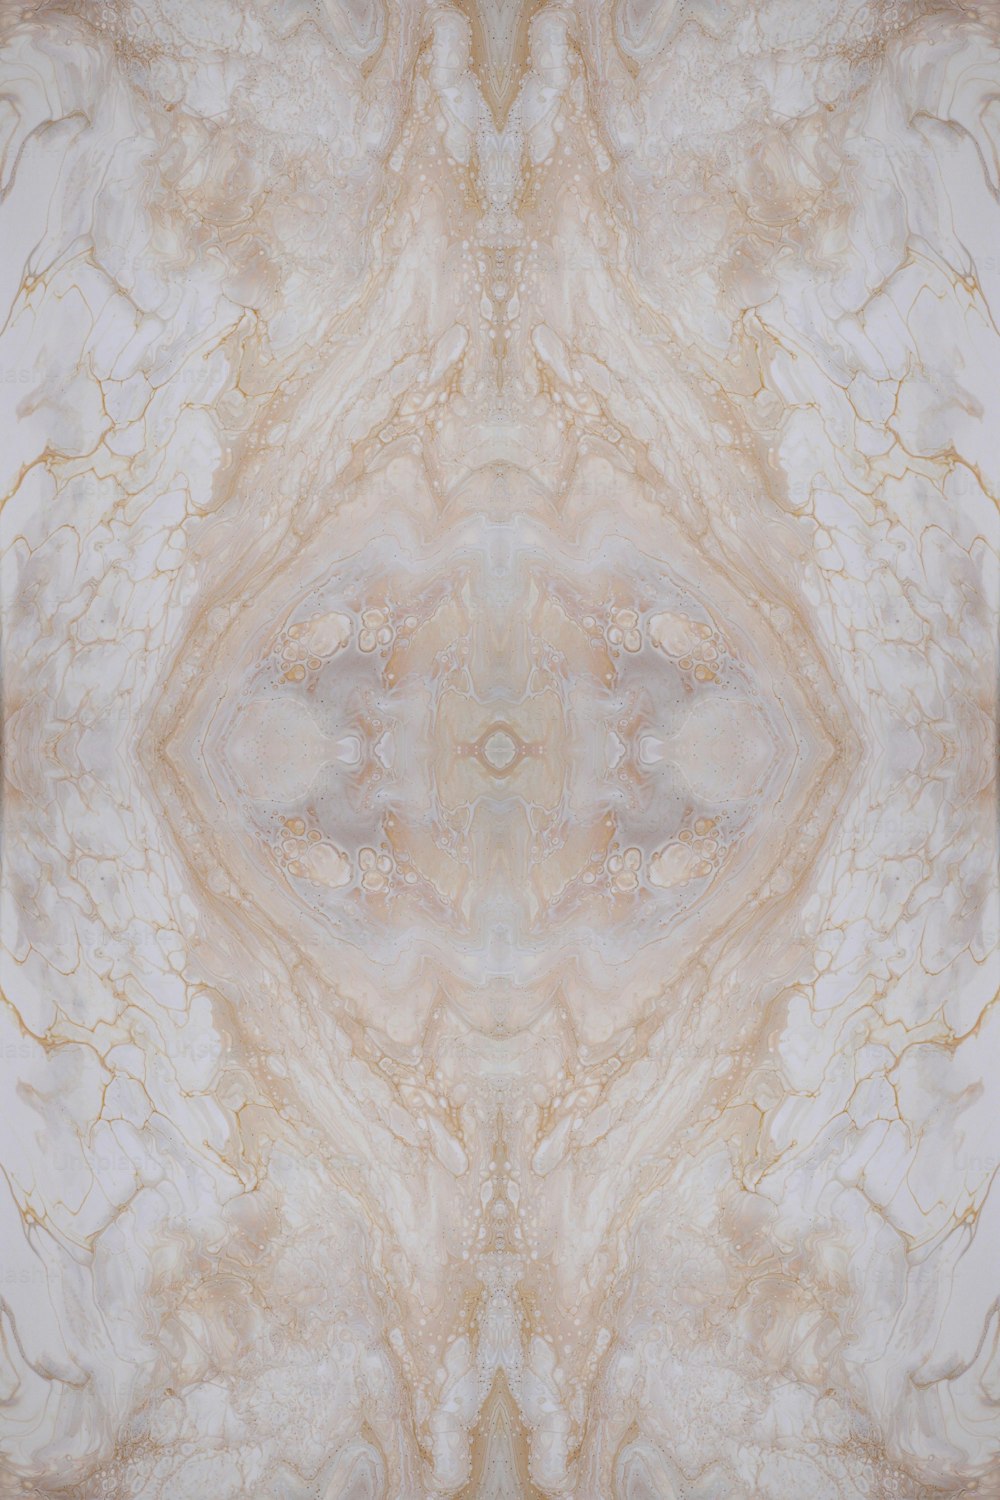 a picture of an abstract design in beige and white